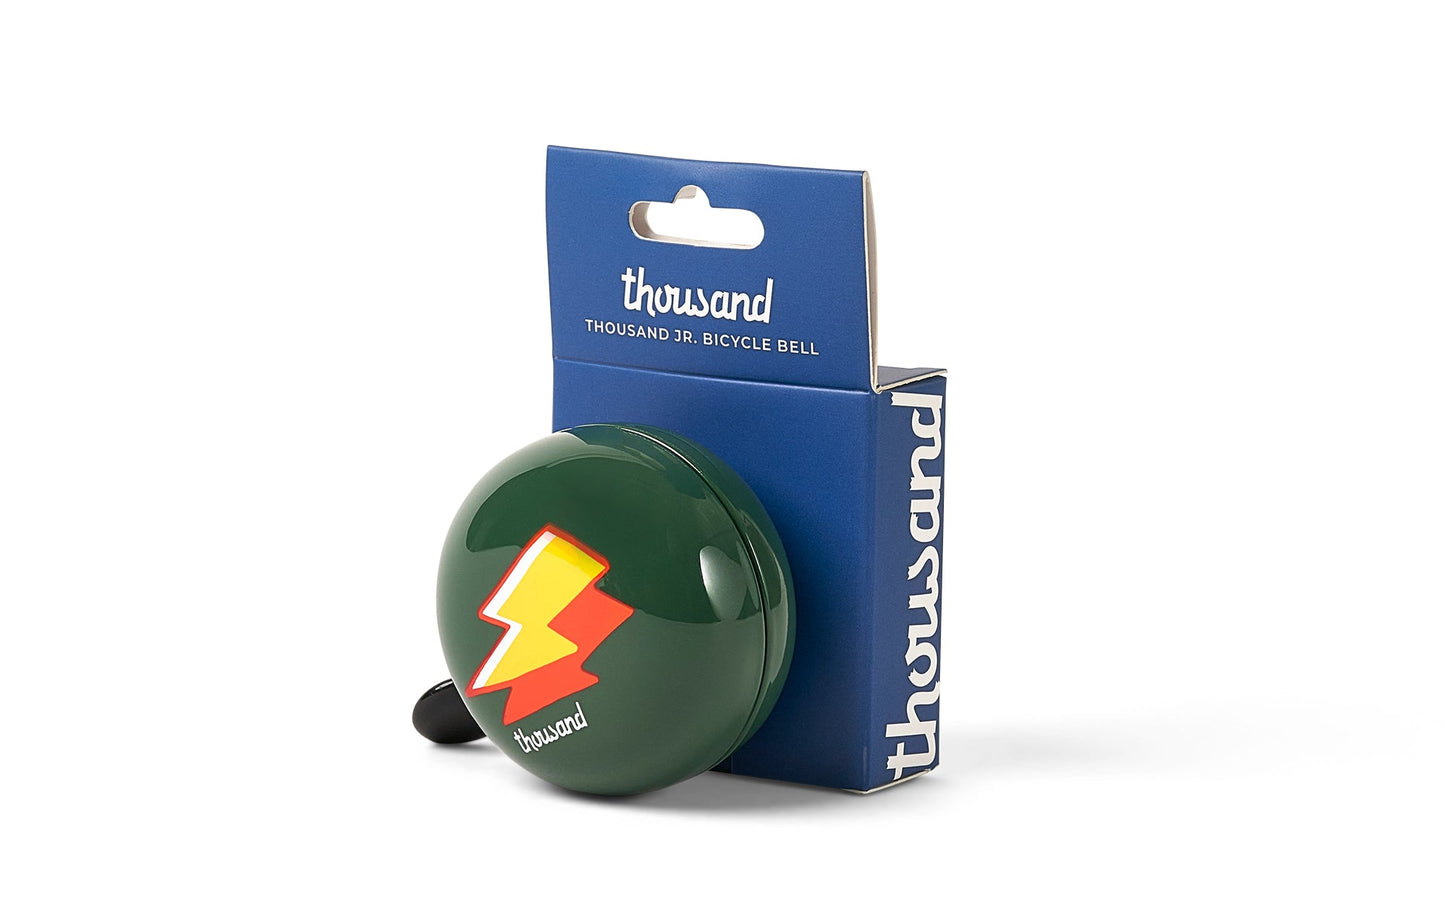 Thousand Jr. Bicycle Bell by Thousand